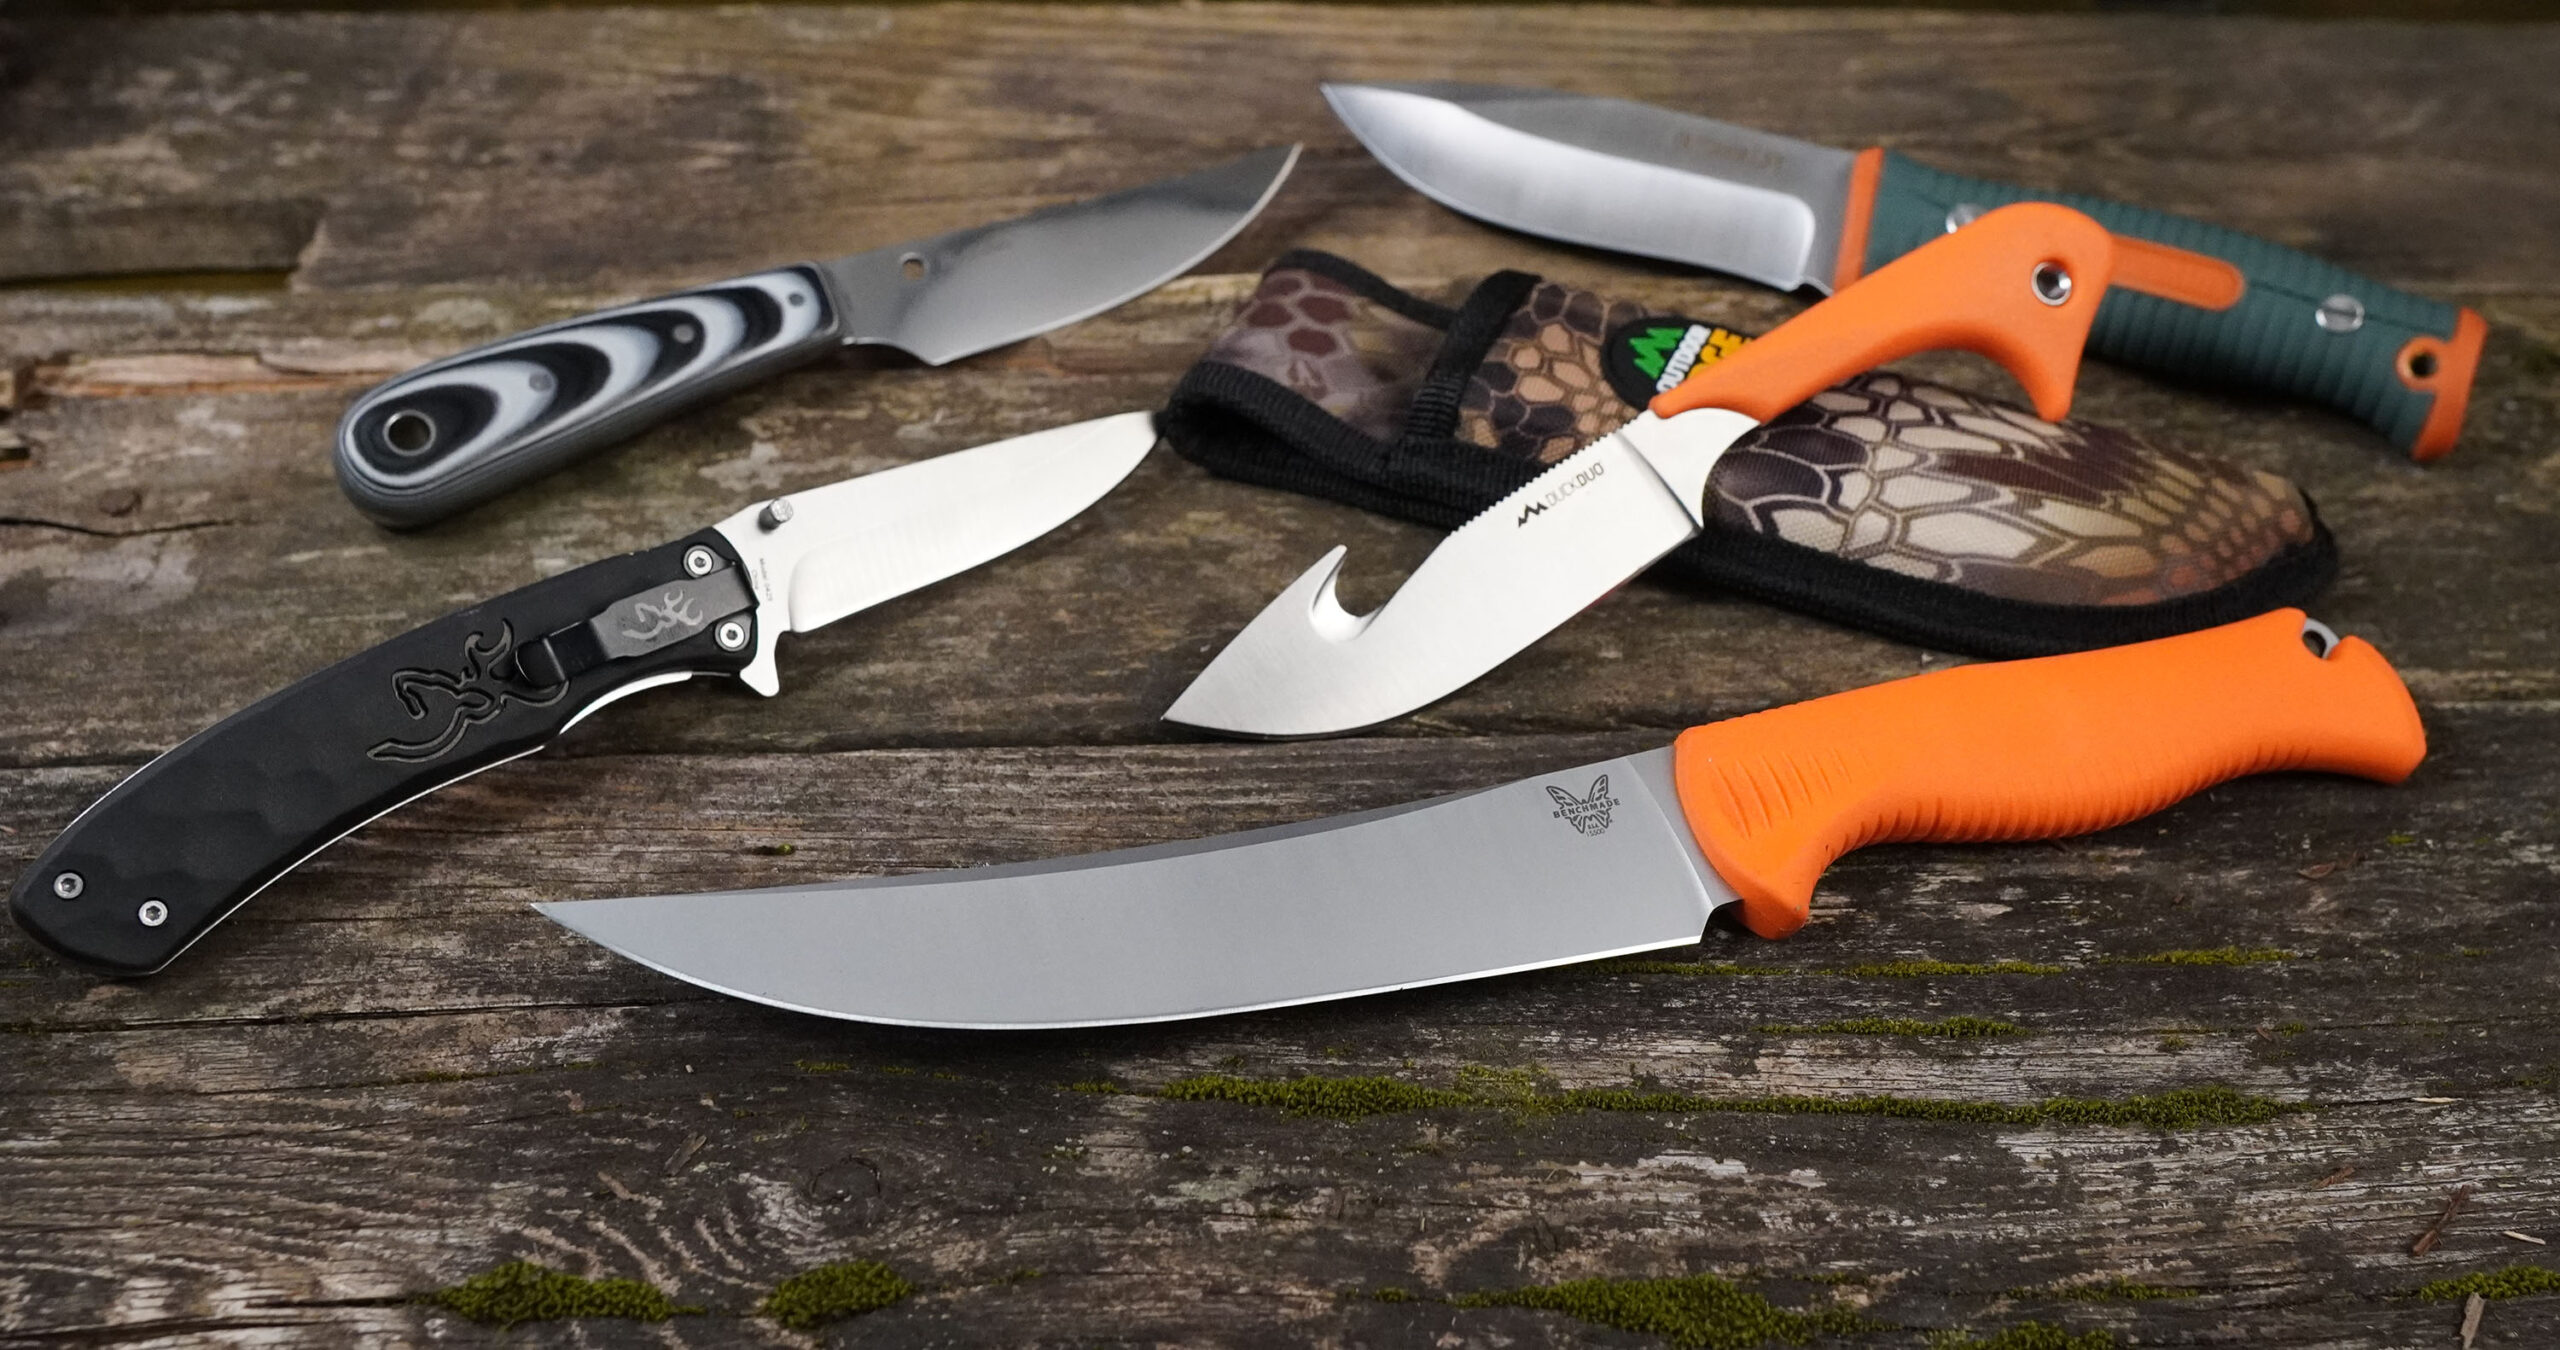 The Best Fixed Blade Knives from Every Brand in 2021 